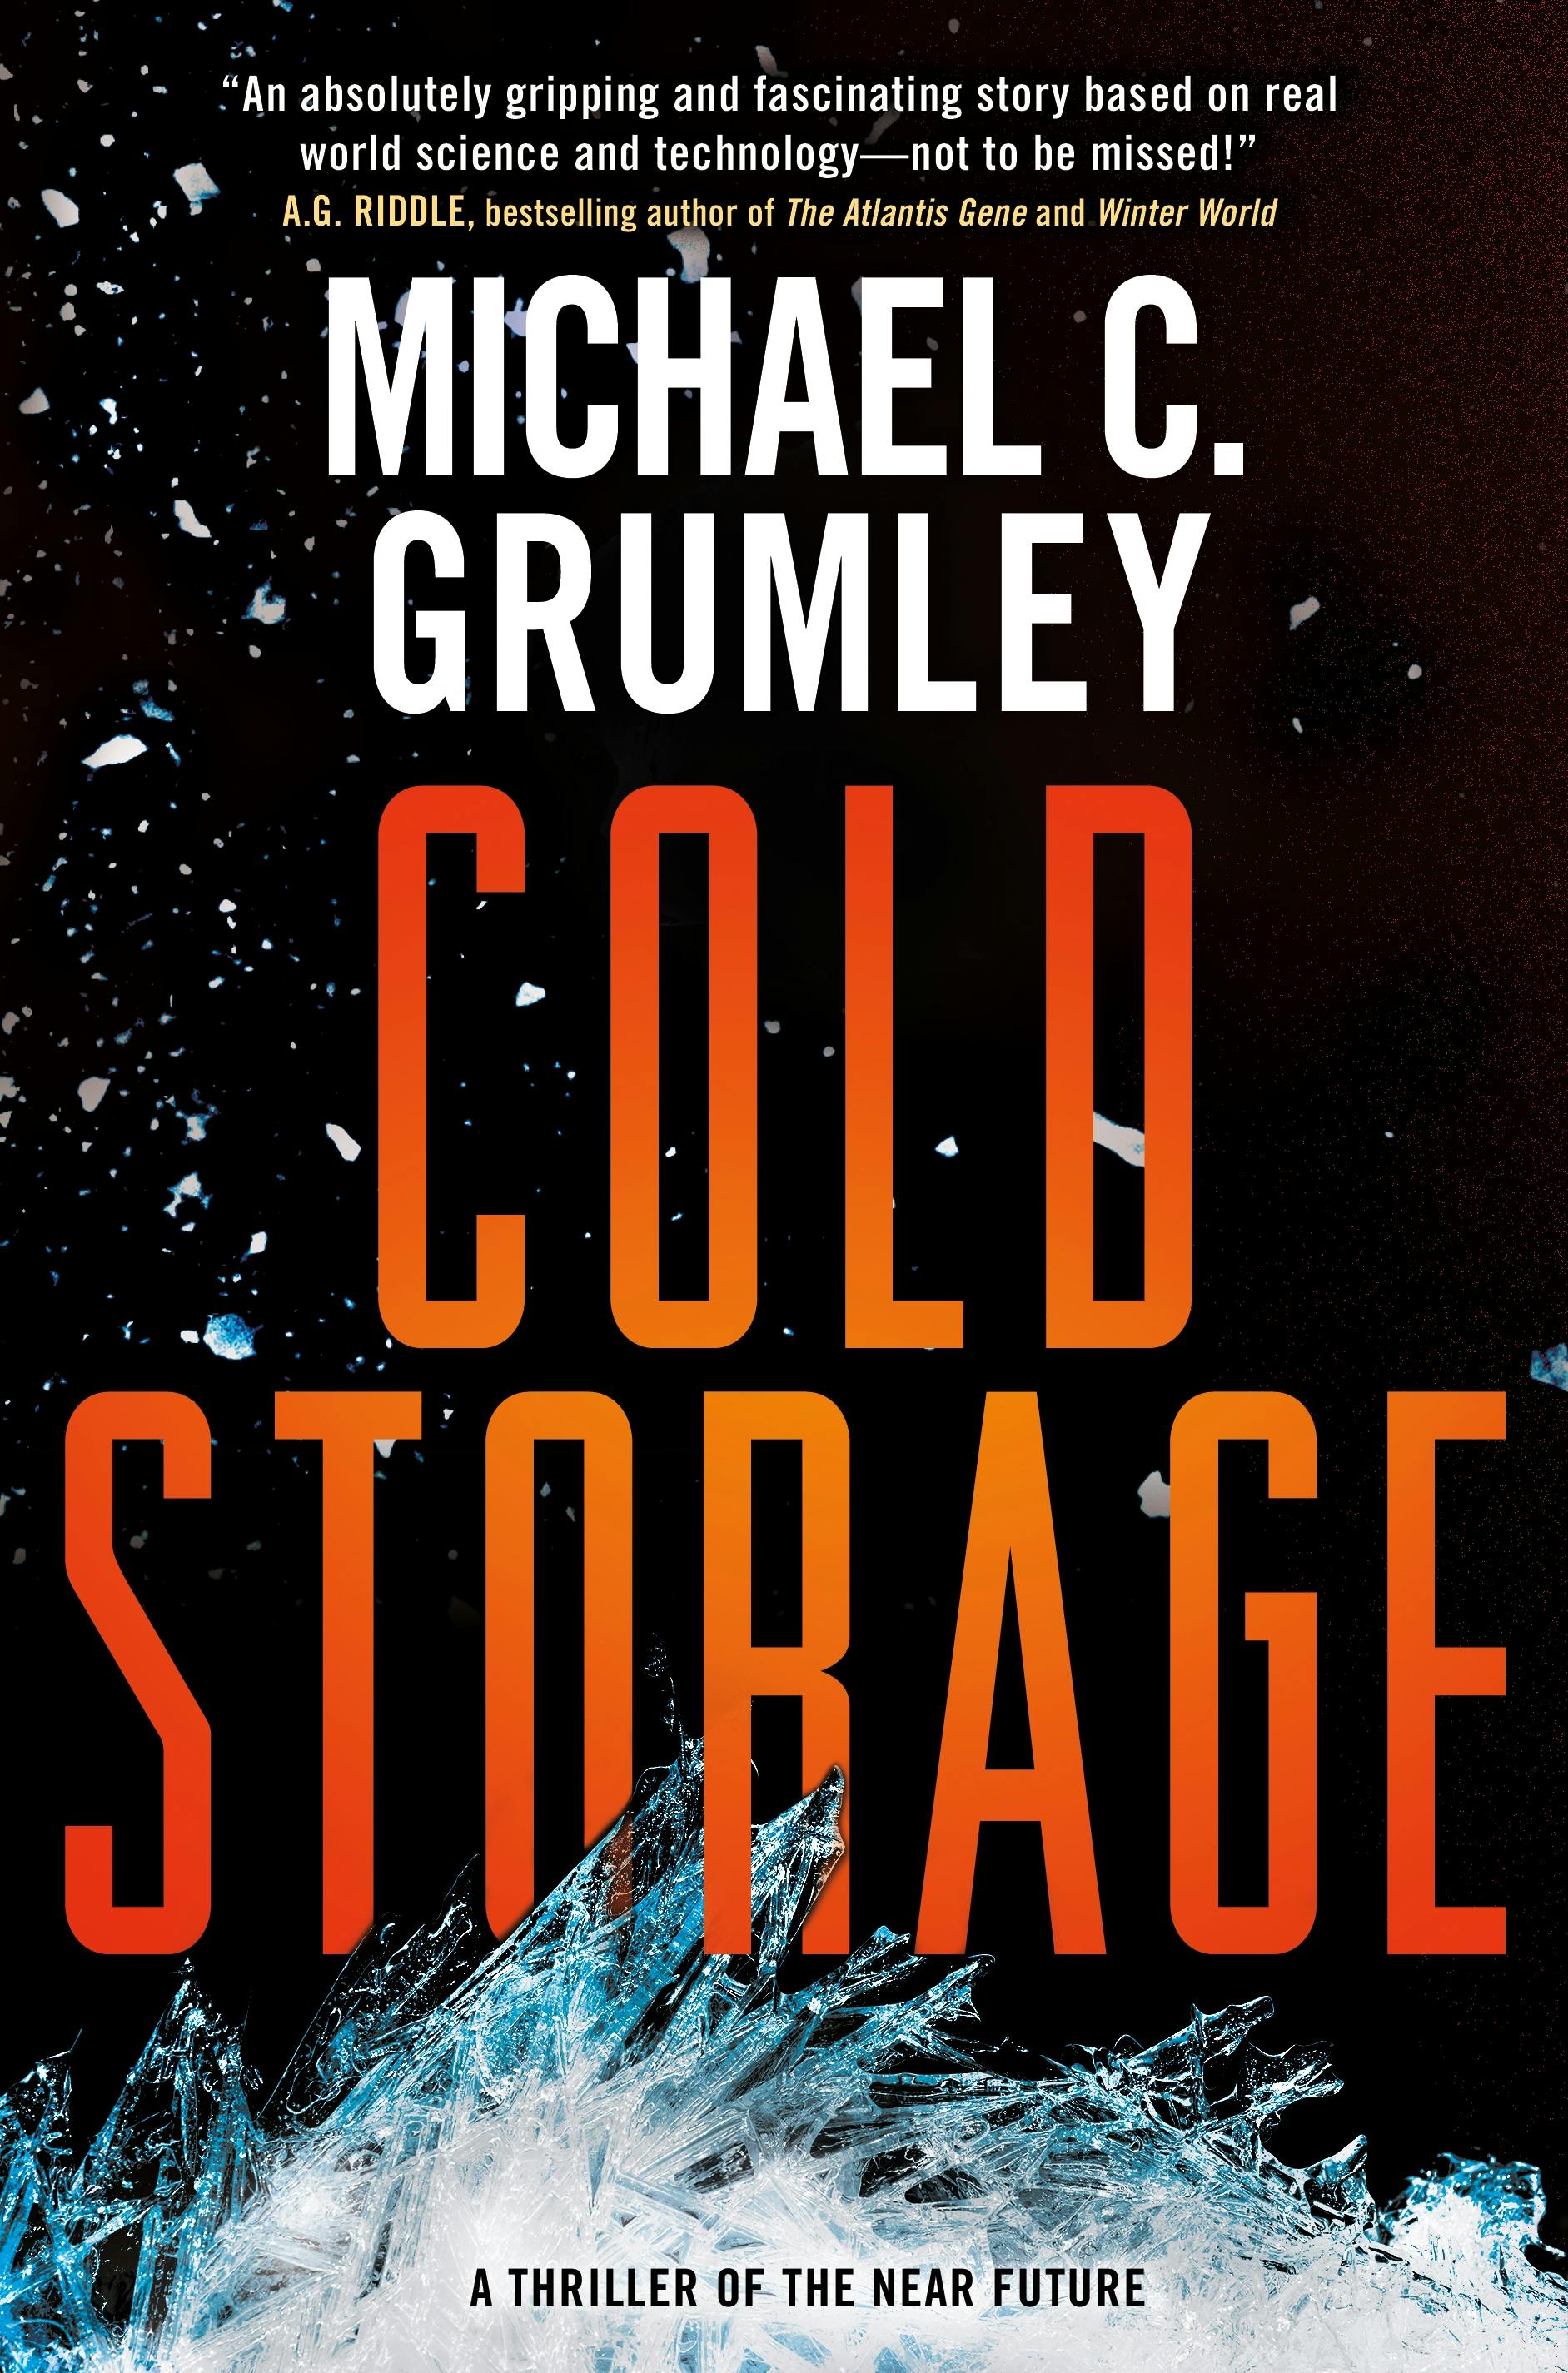 Cover for the book titled as: Cold Storage